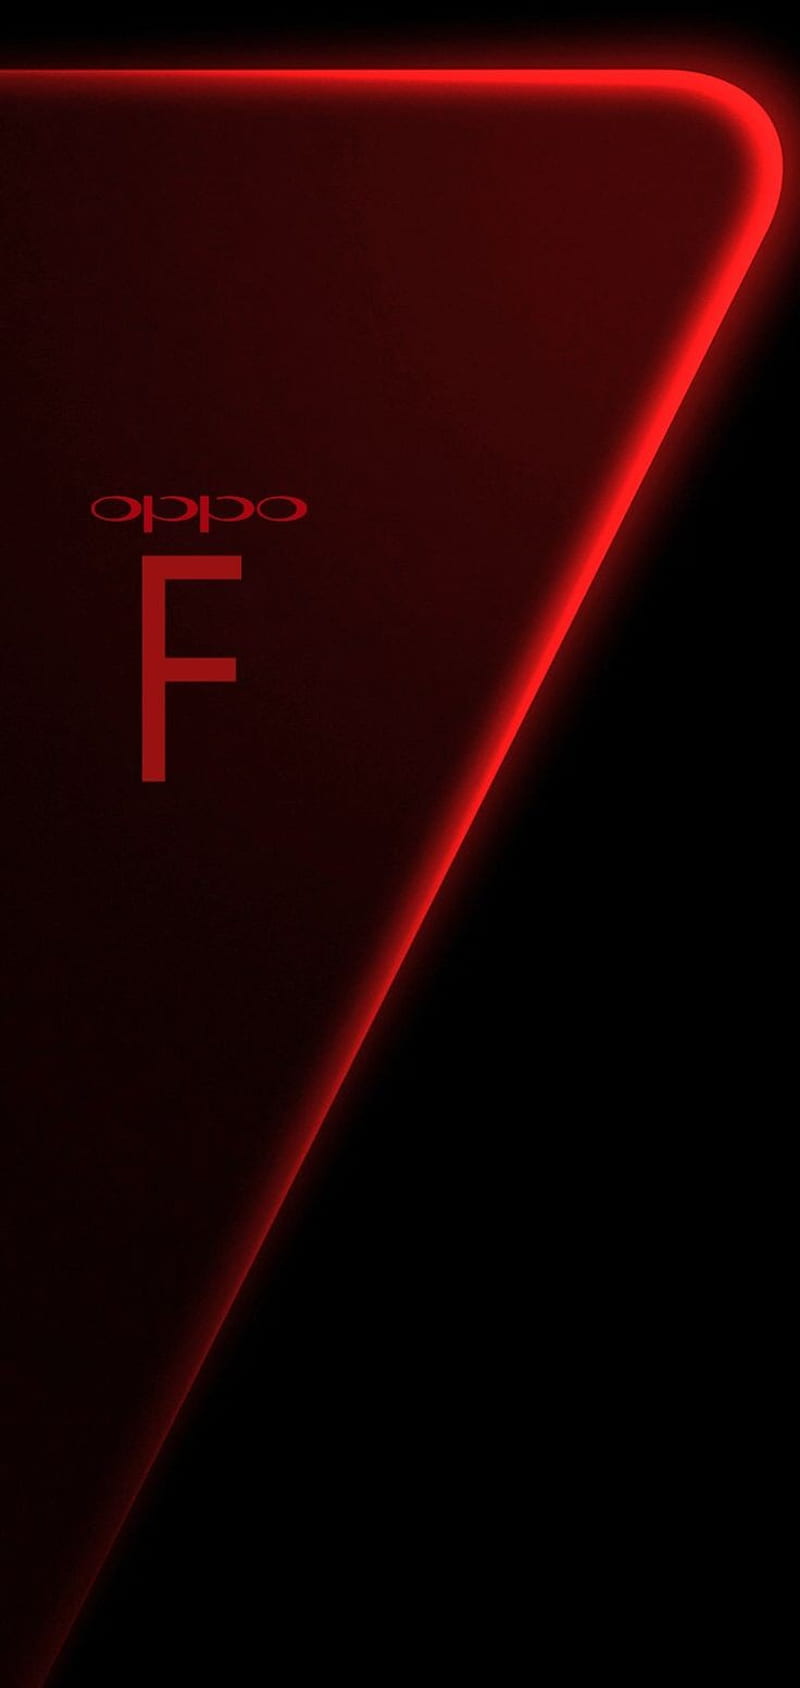 ragy Mobile Back Cover for Oppo F17 Pro Grey, Red, Wallpaper, Cool  Pattern-1026 : Amazon.in: Electronics